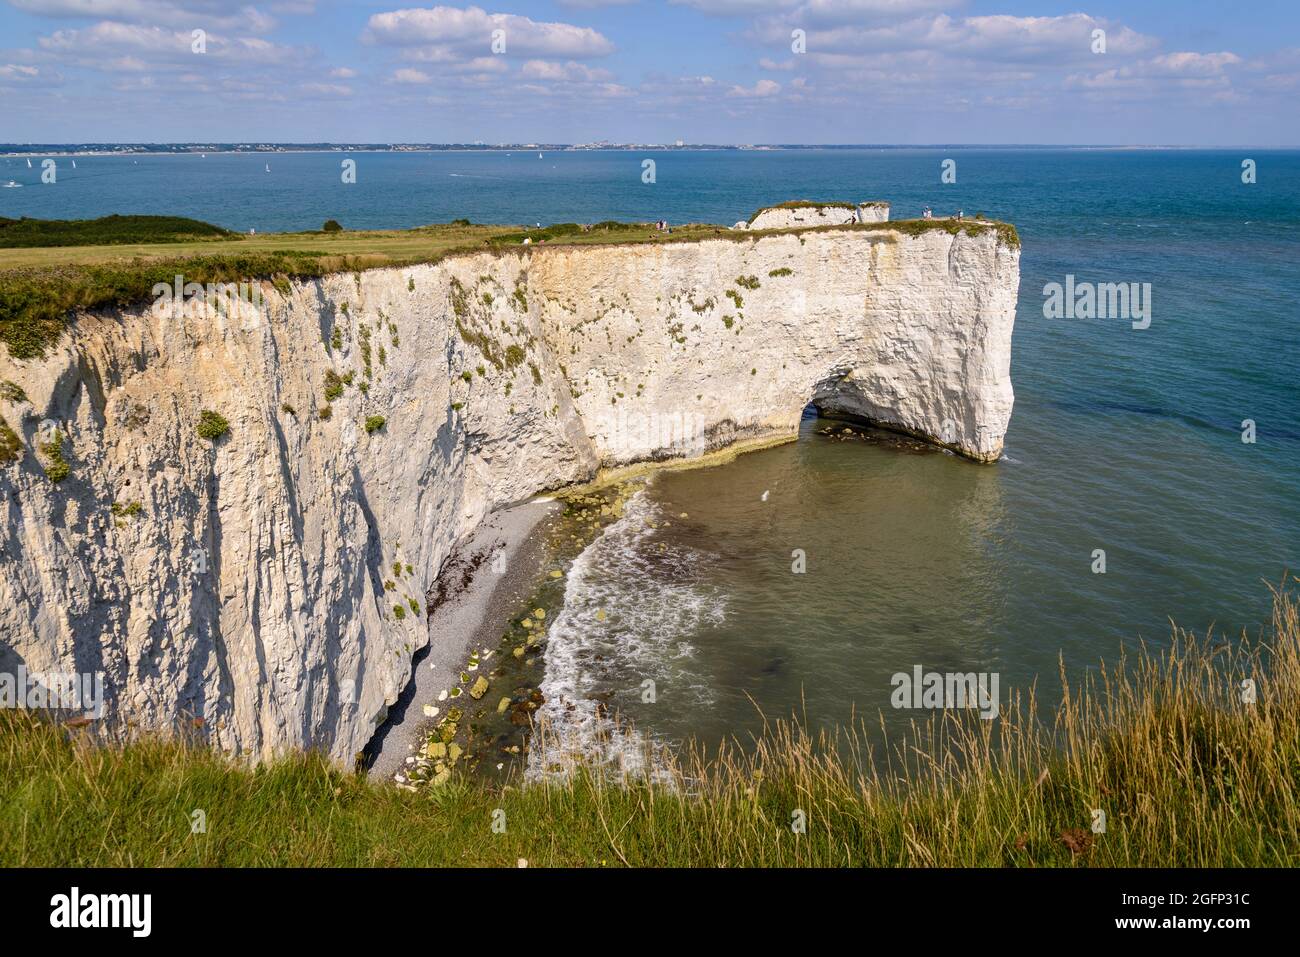 White chalk cliffs at Old Harry rocks, Jurassic Coast, Purbeck, Dorset, UK from western perspective Stock Photo